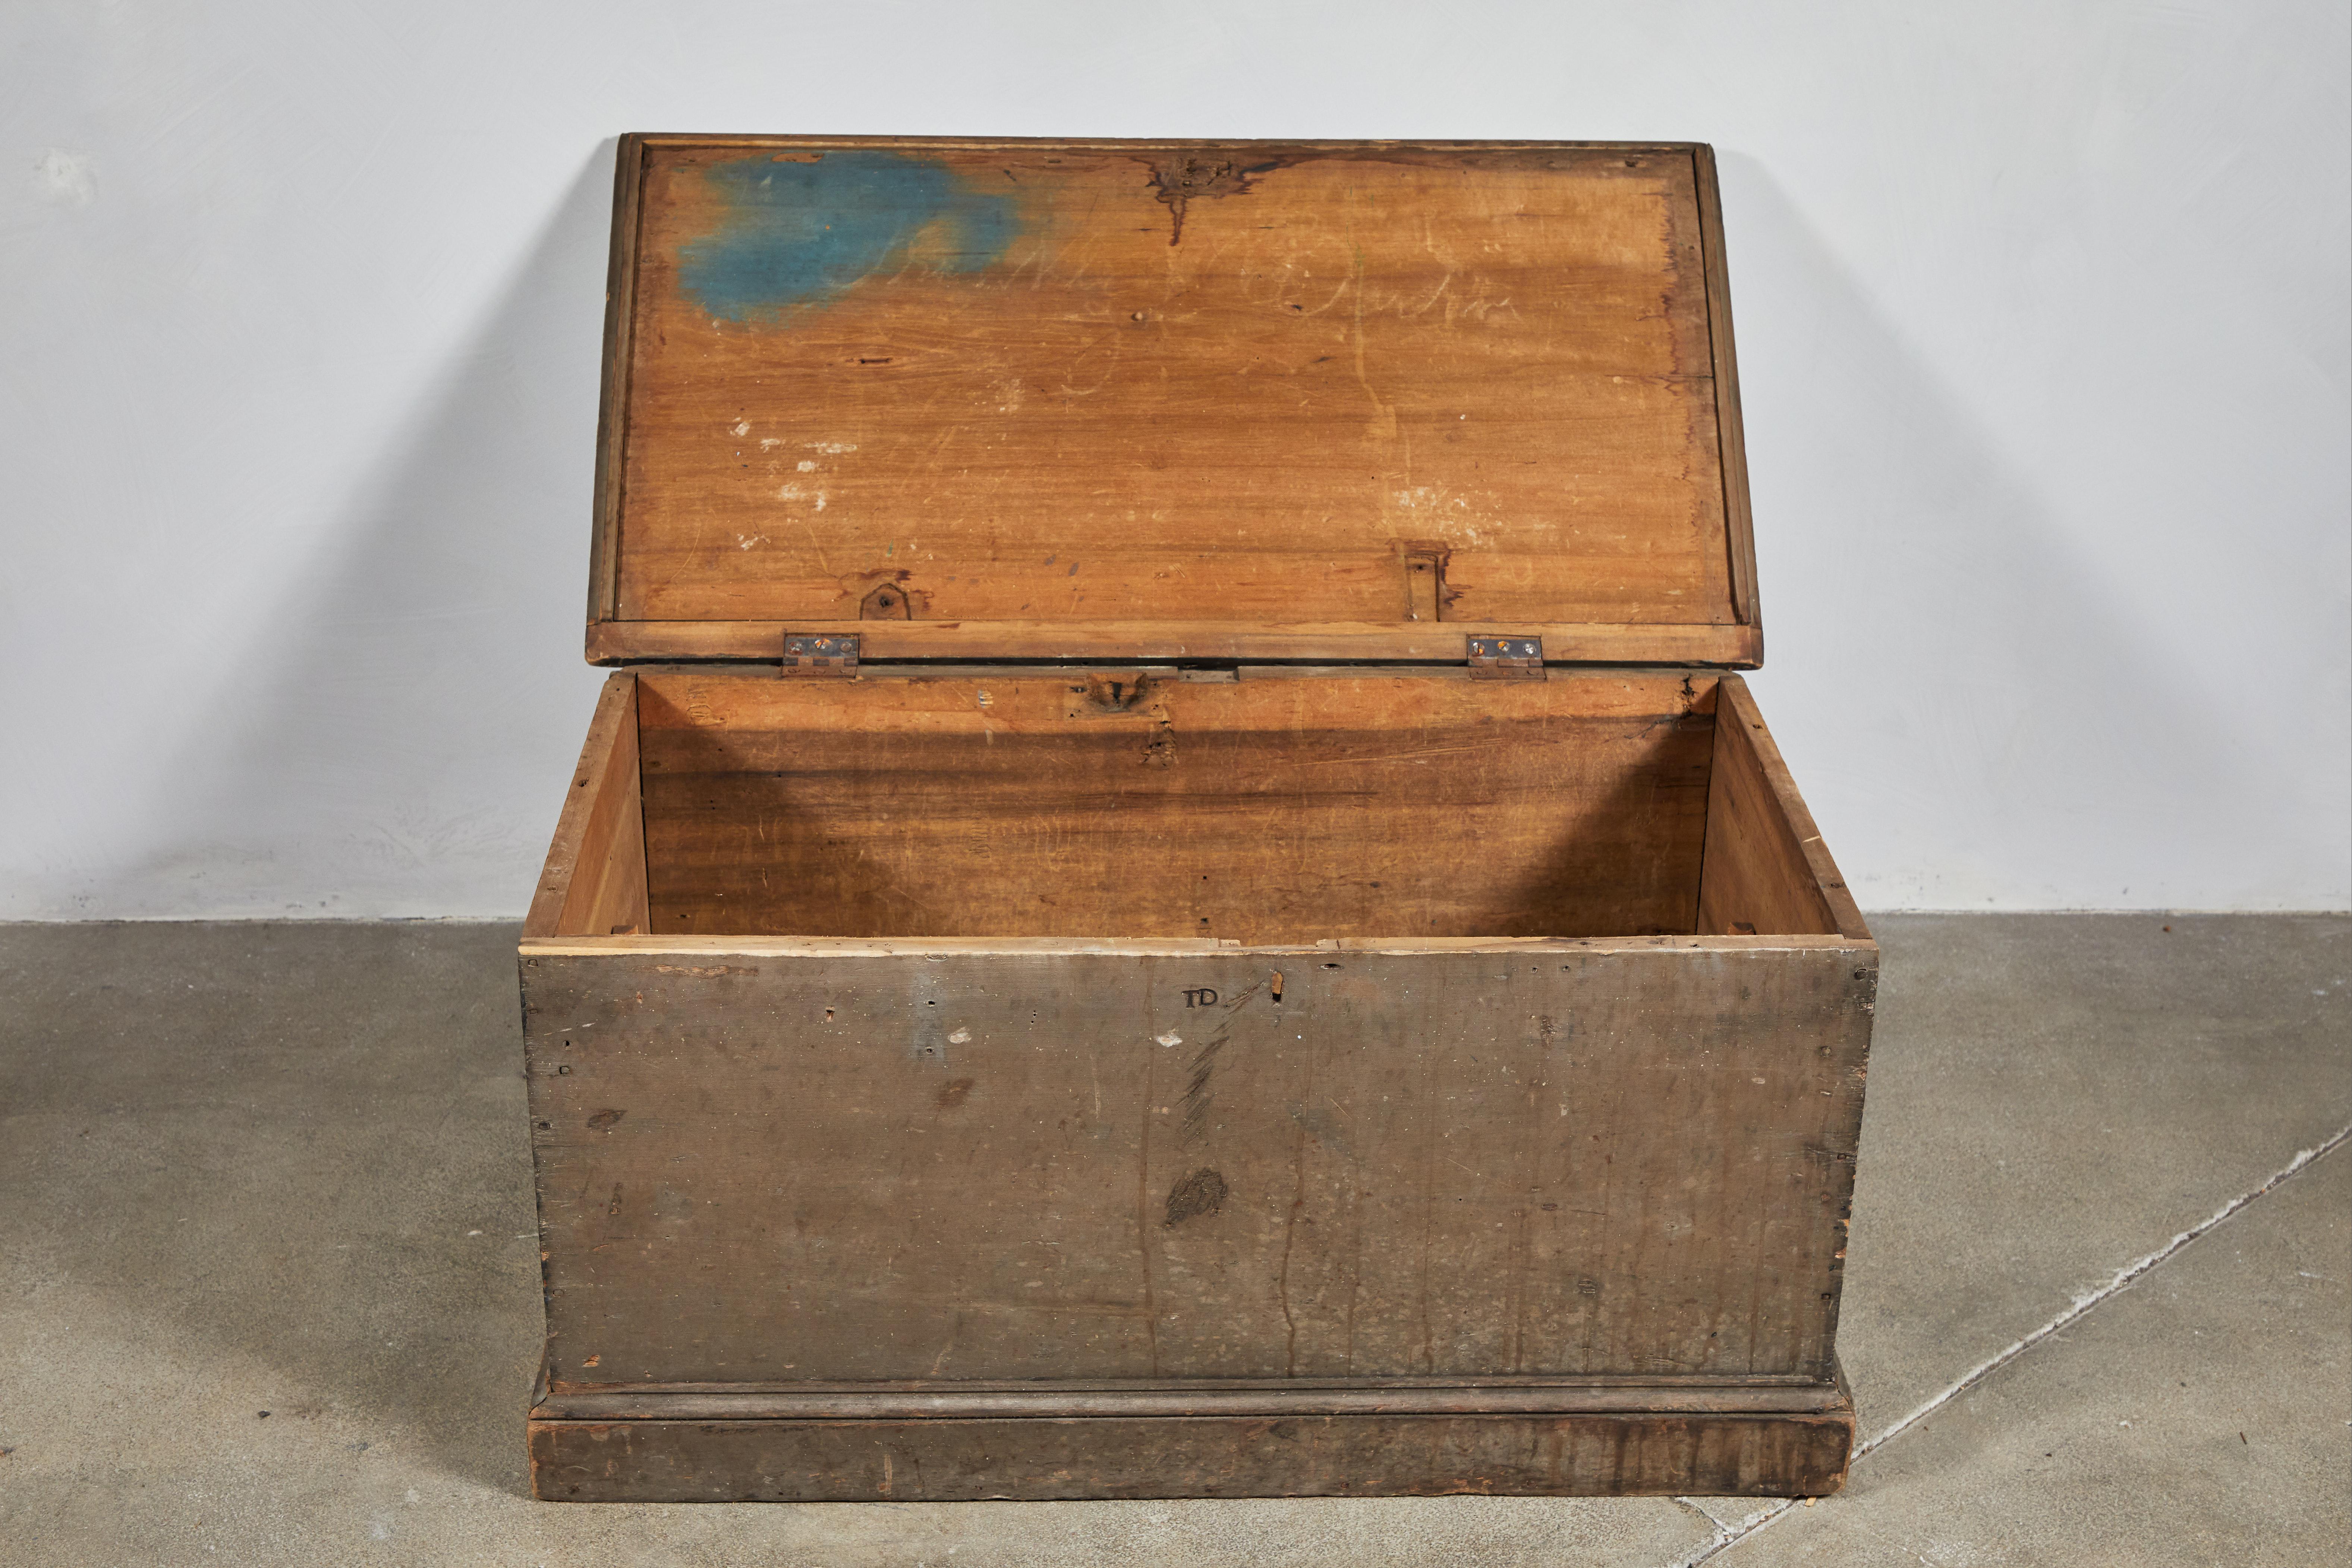 Early American storage trunk with original stained finish.